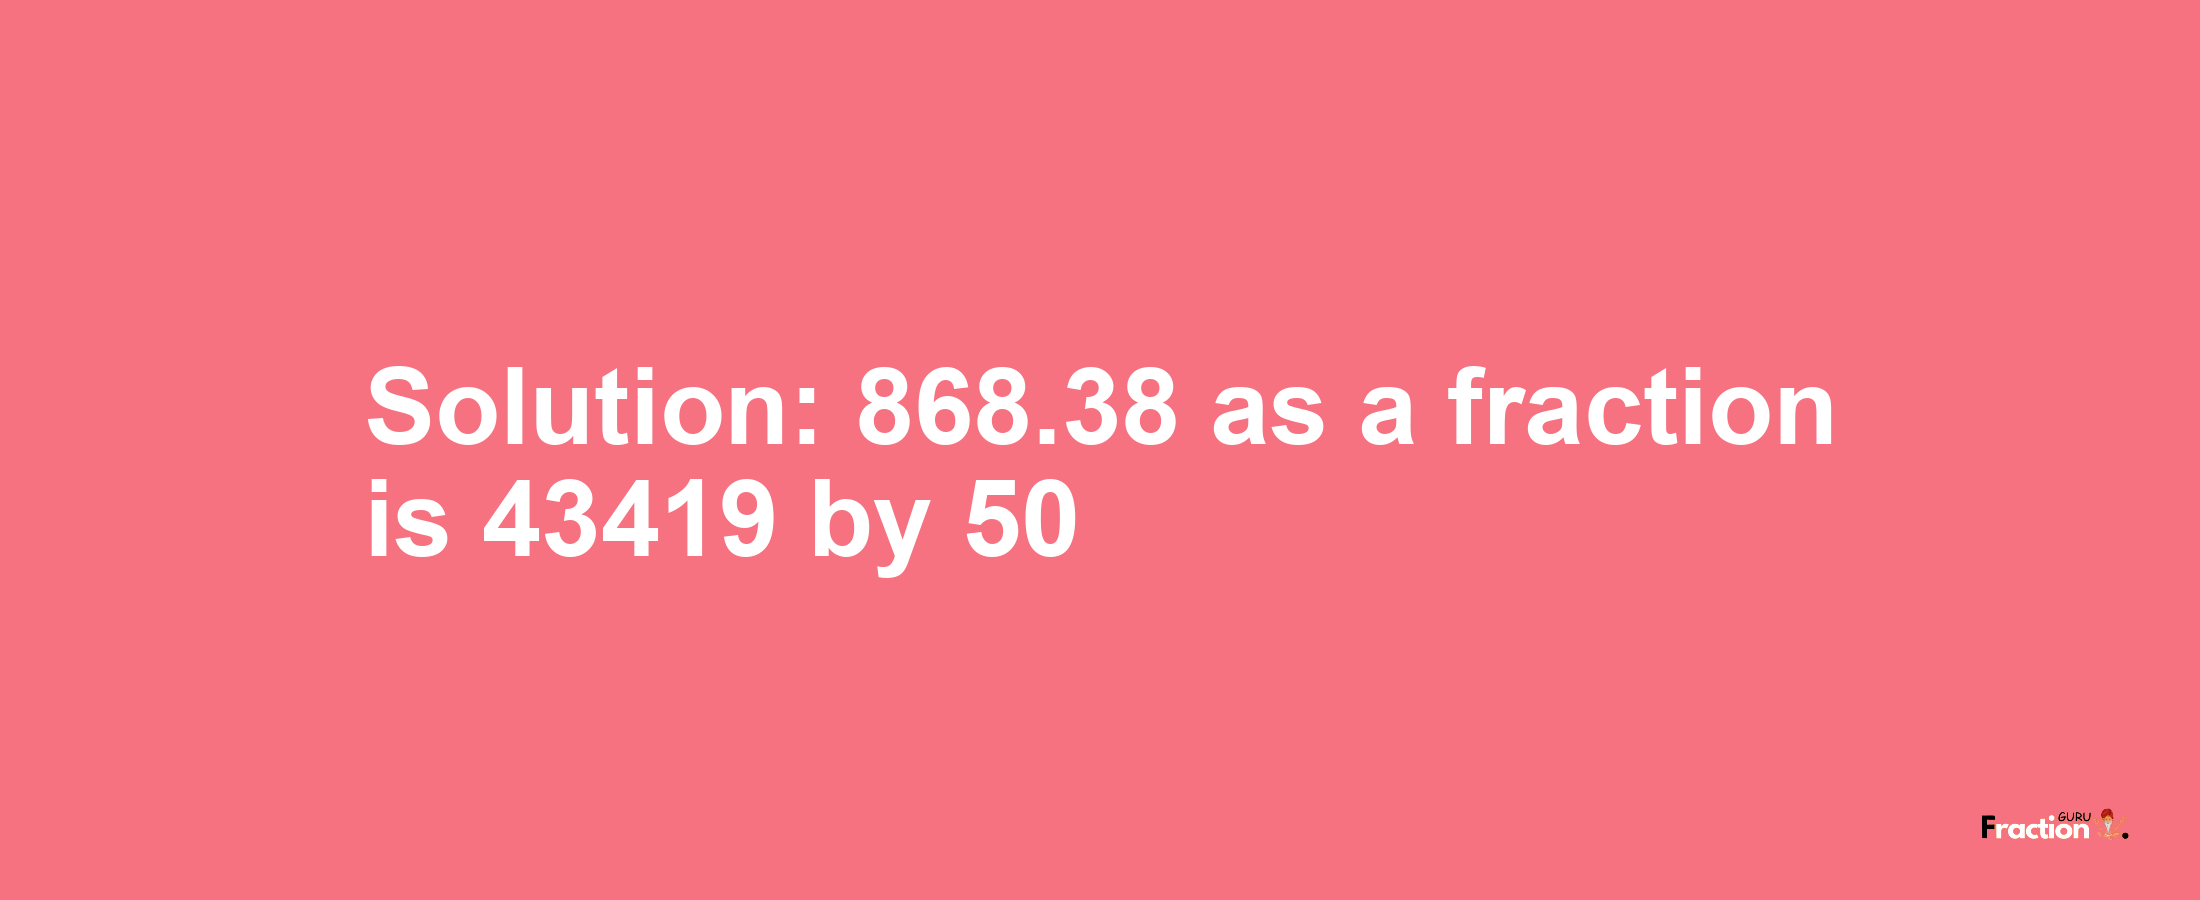 Solution:868.38 as a fraction is 43419/50